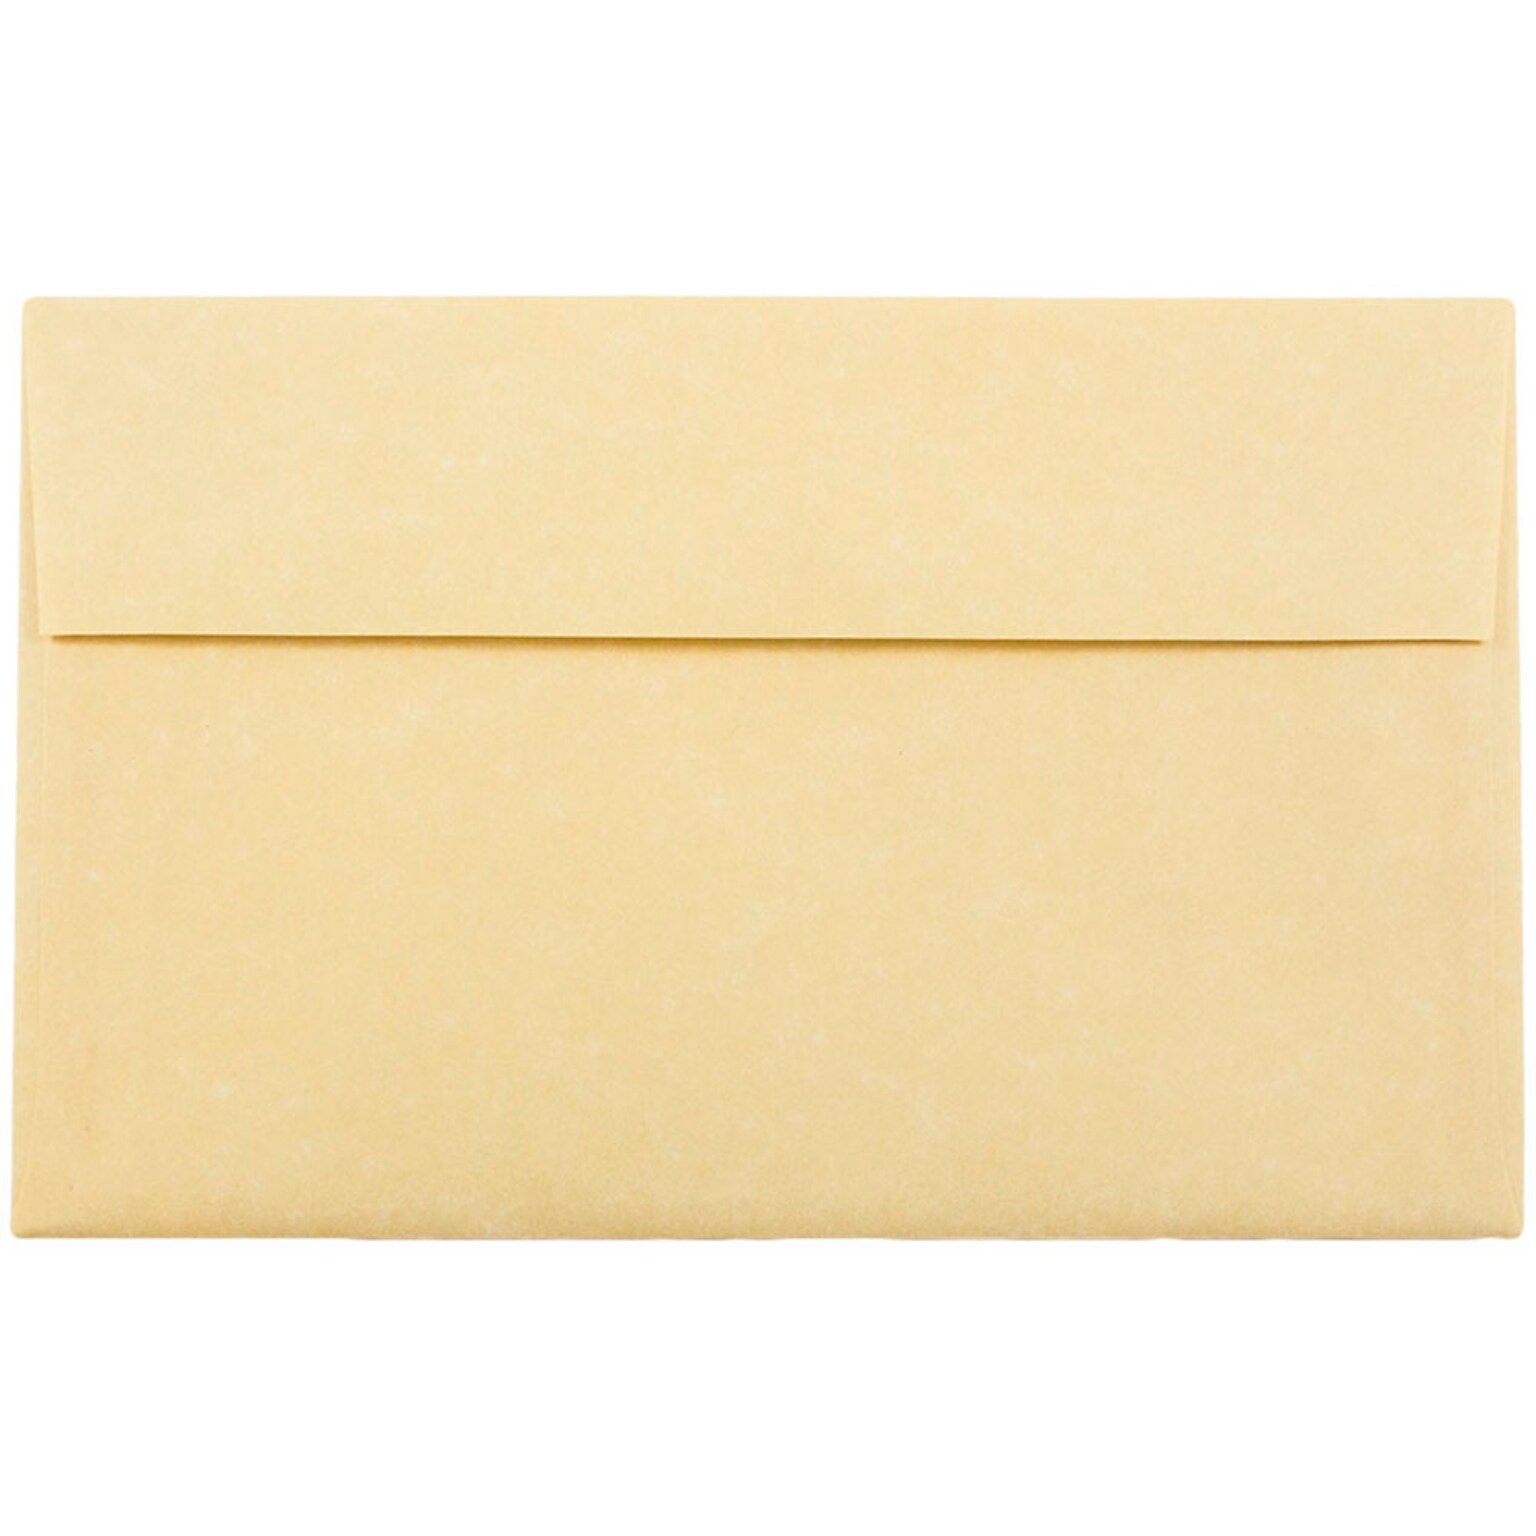 JAM Paper A10 Parchment Invitation Envelopes, 6 x 9.5, Antique Gold Recycled, 50/Pack (12514I)